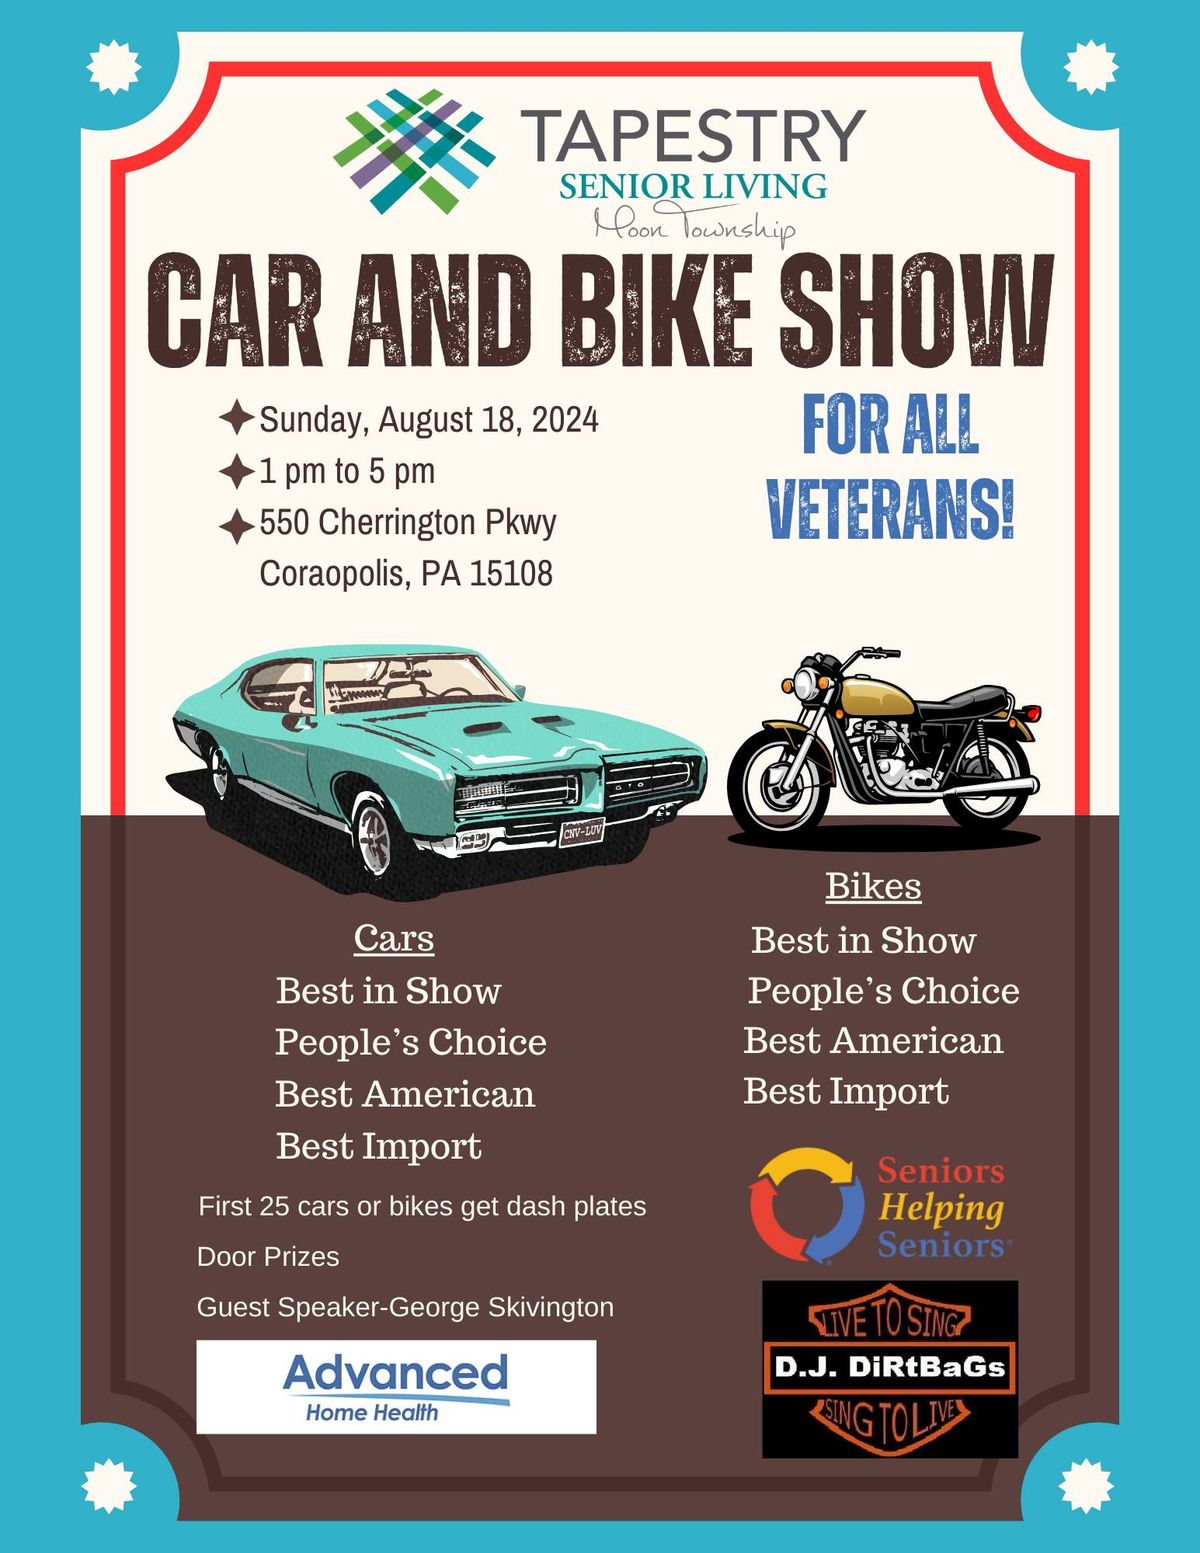 Car and Bike Show for ALL Veterans